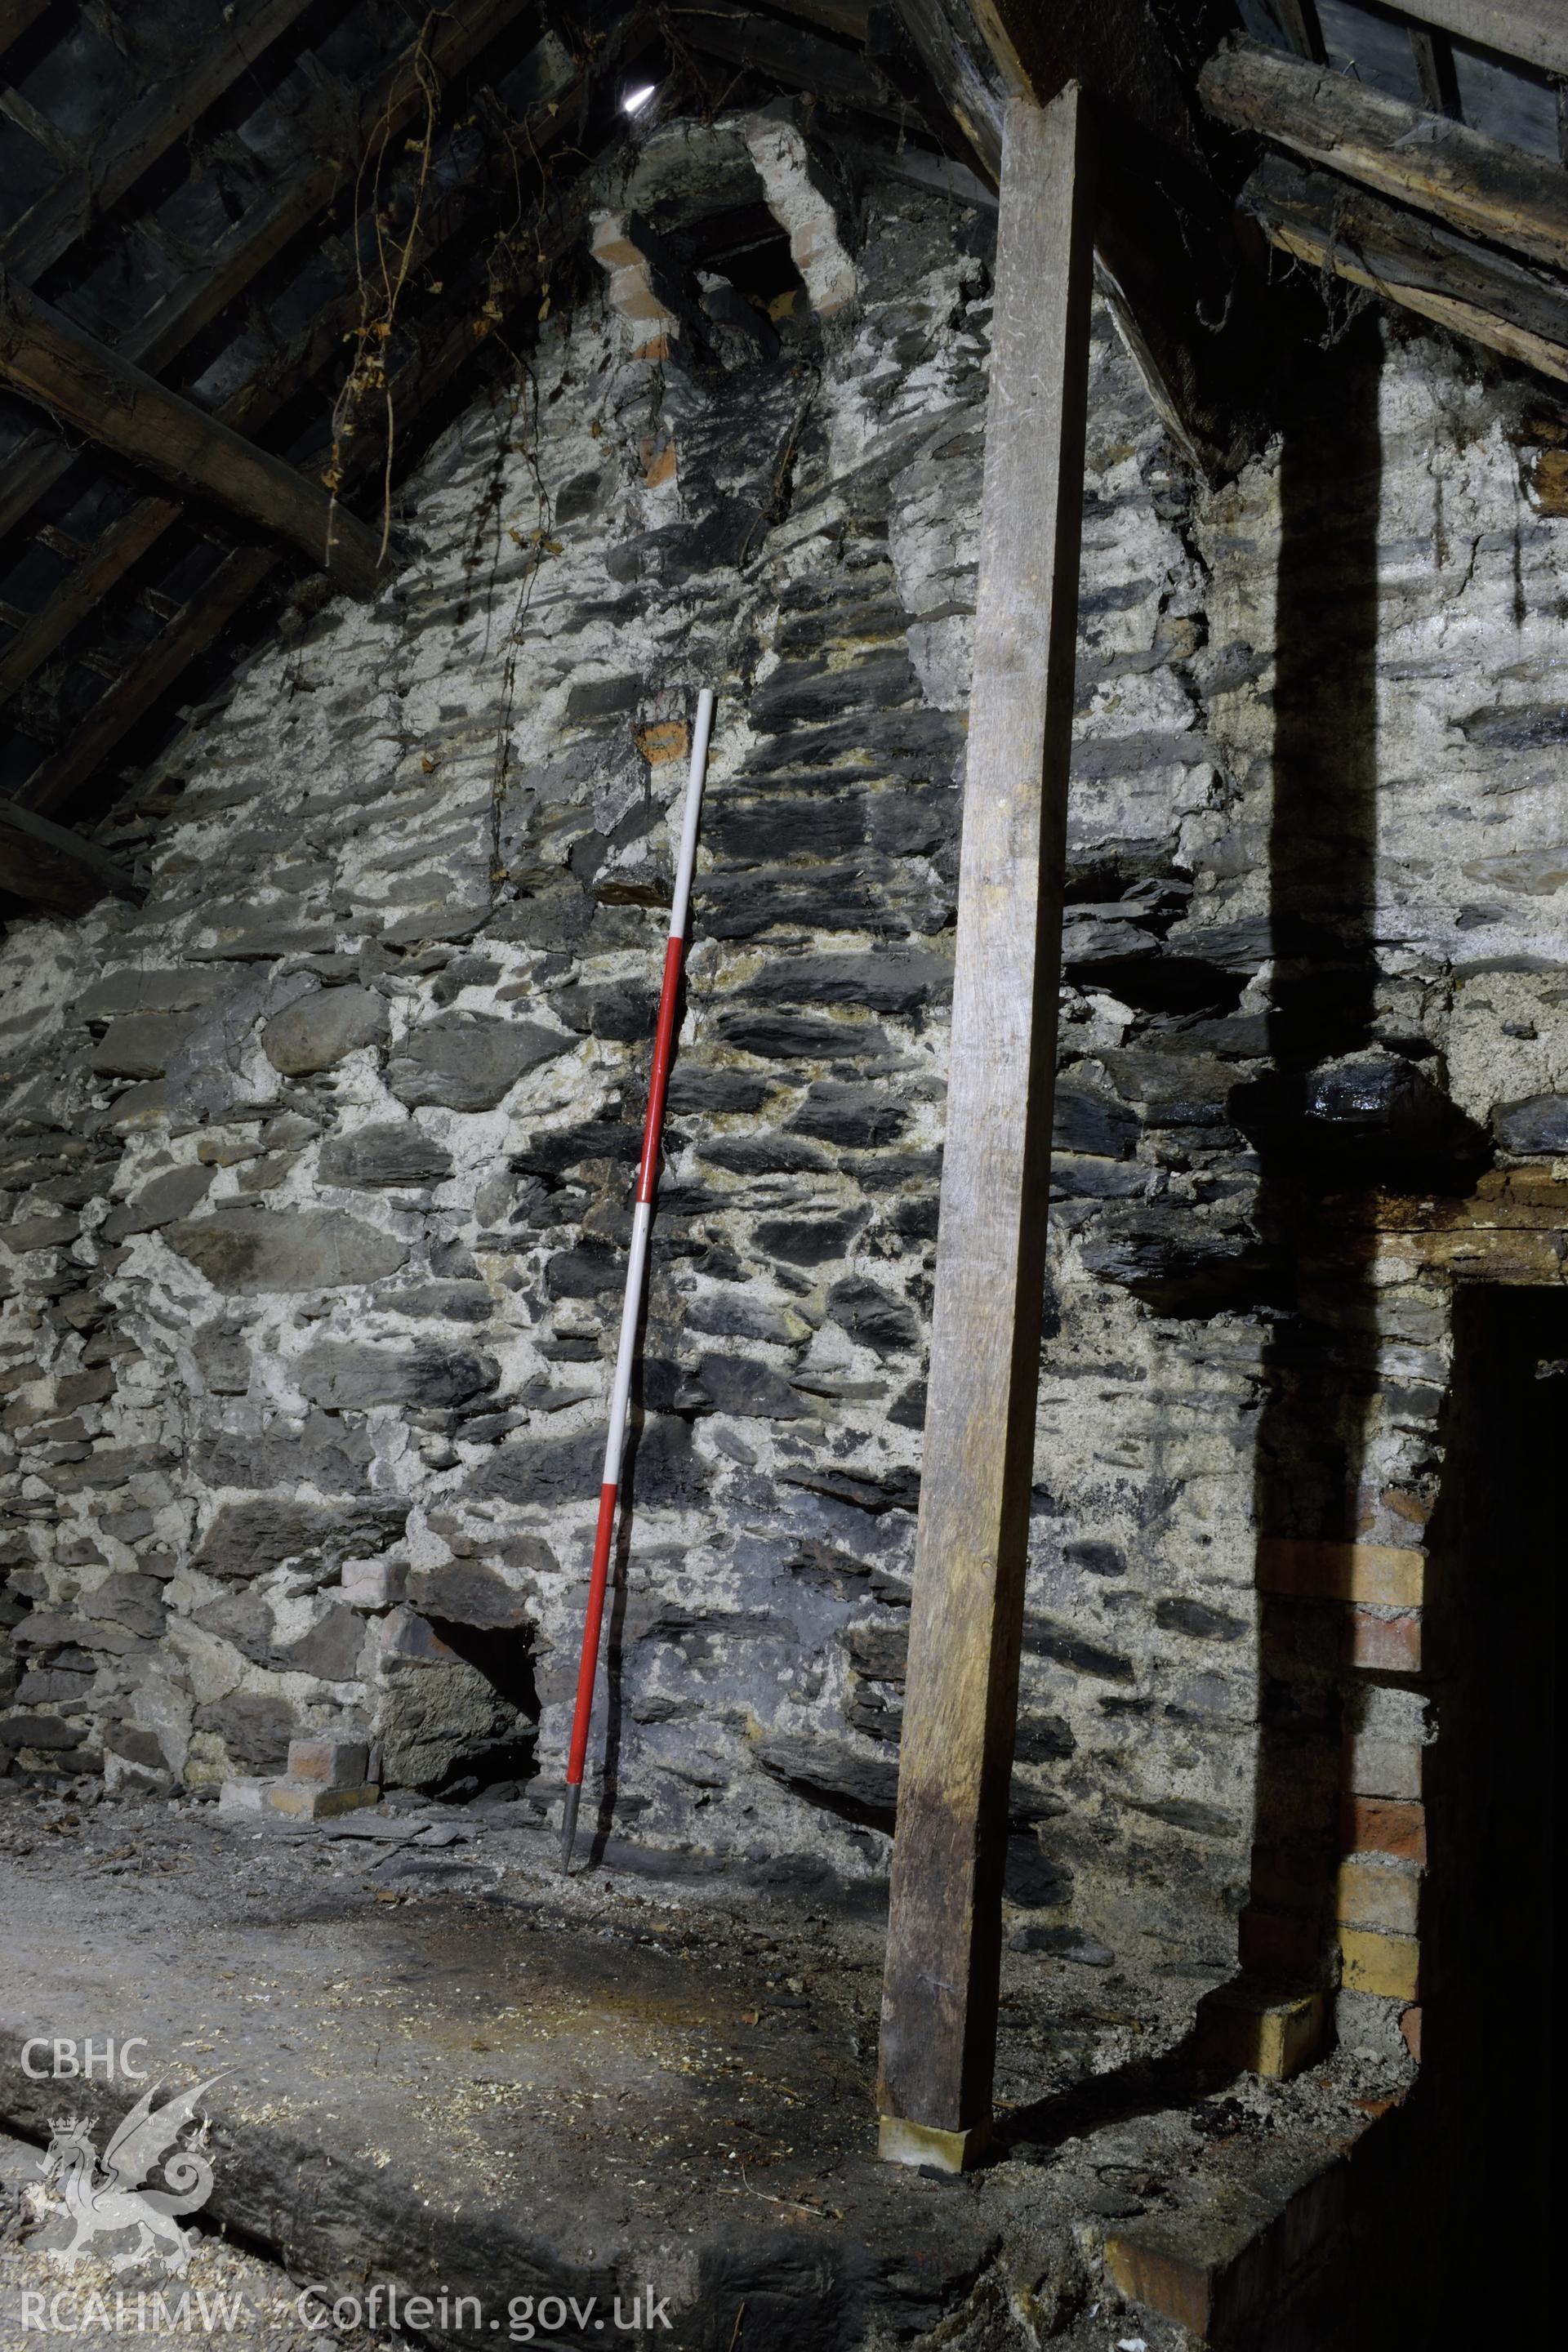 Photograph showing the south internal gable of the forge at Glascoed or Islwyn Smithy, Melin-y-Wig, Denbighshire, by I.P. Brooks of Engineering Archaeological Services Ltd. Taken on 5th April 2019.